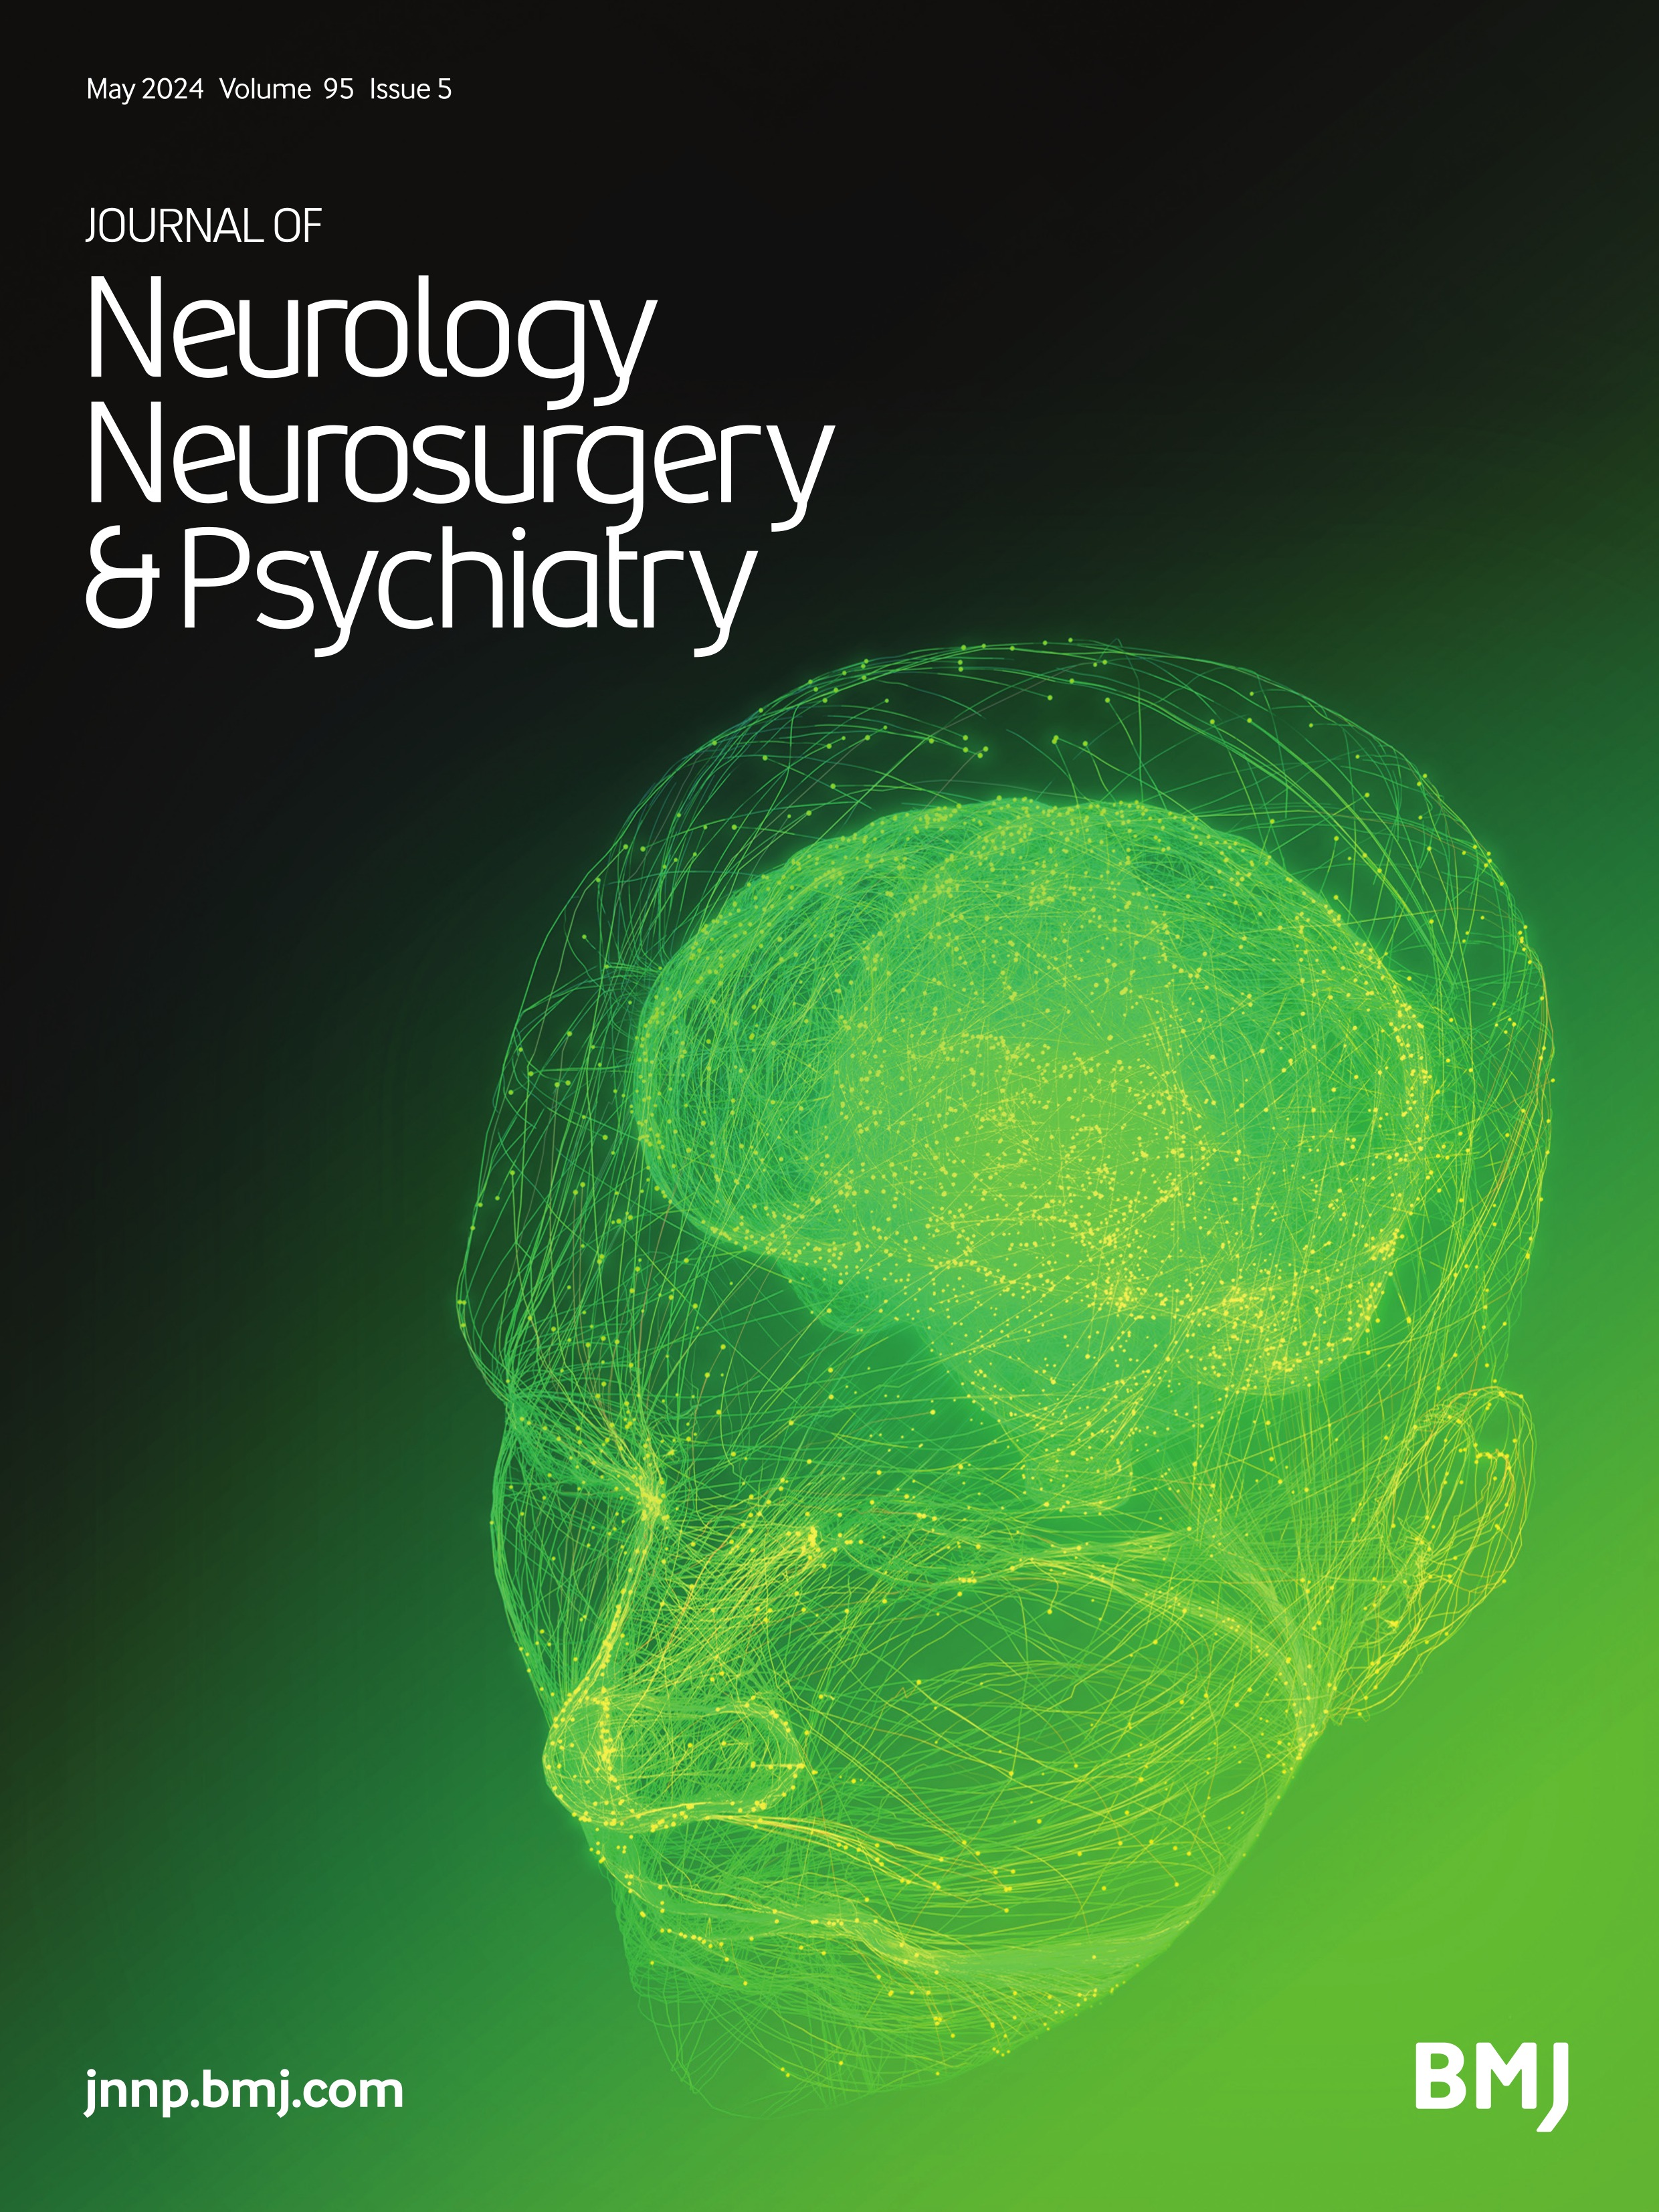 Methodological considerations for observational studies of treatment effectiveness in neurology: a clinicians guide